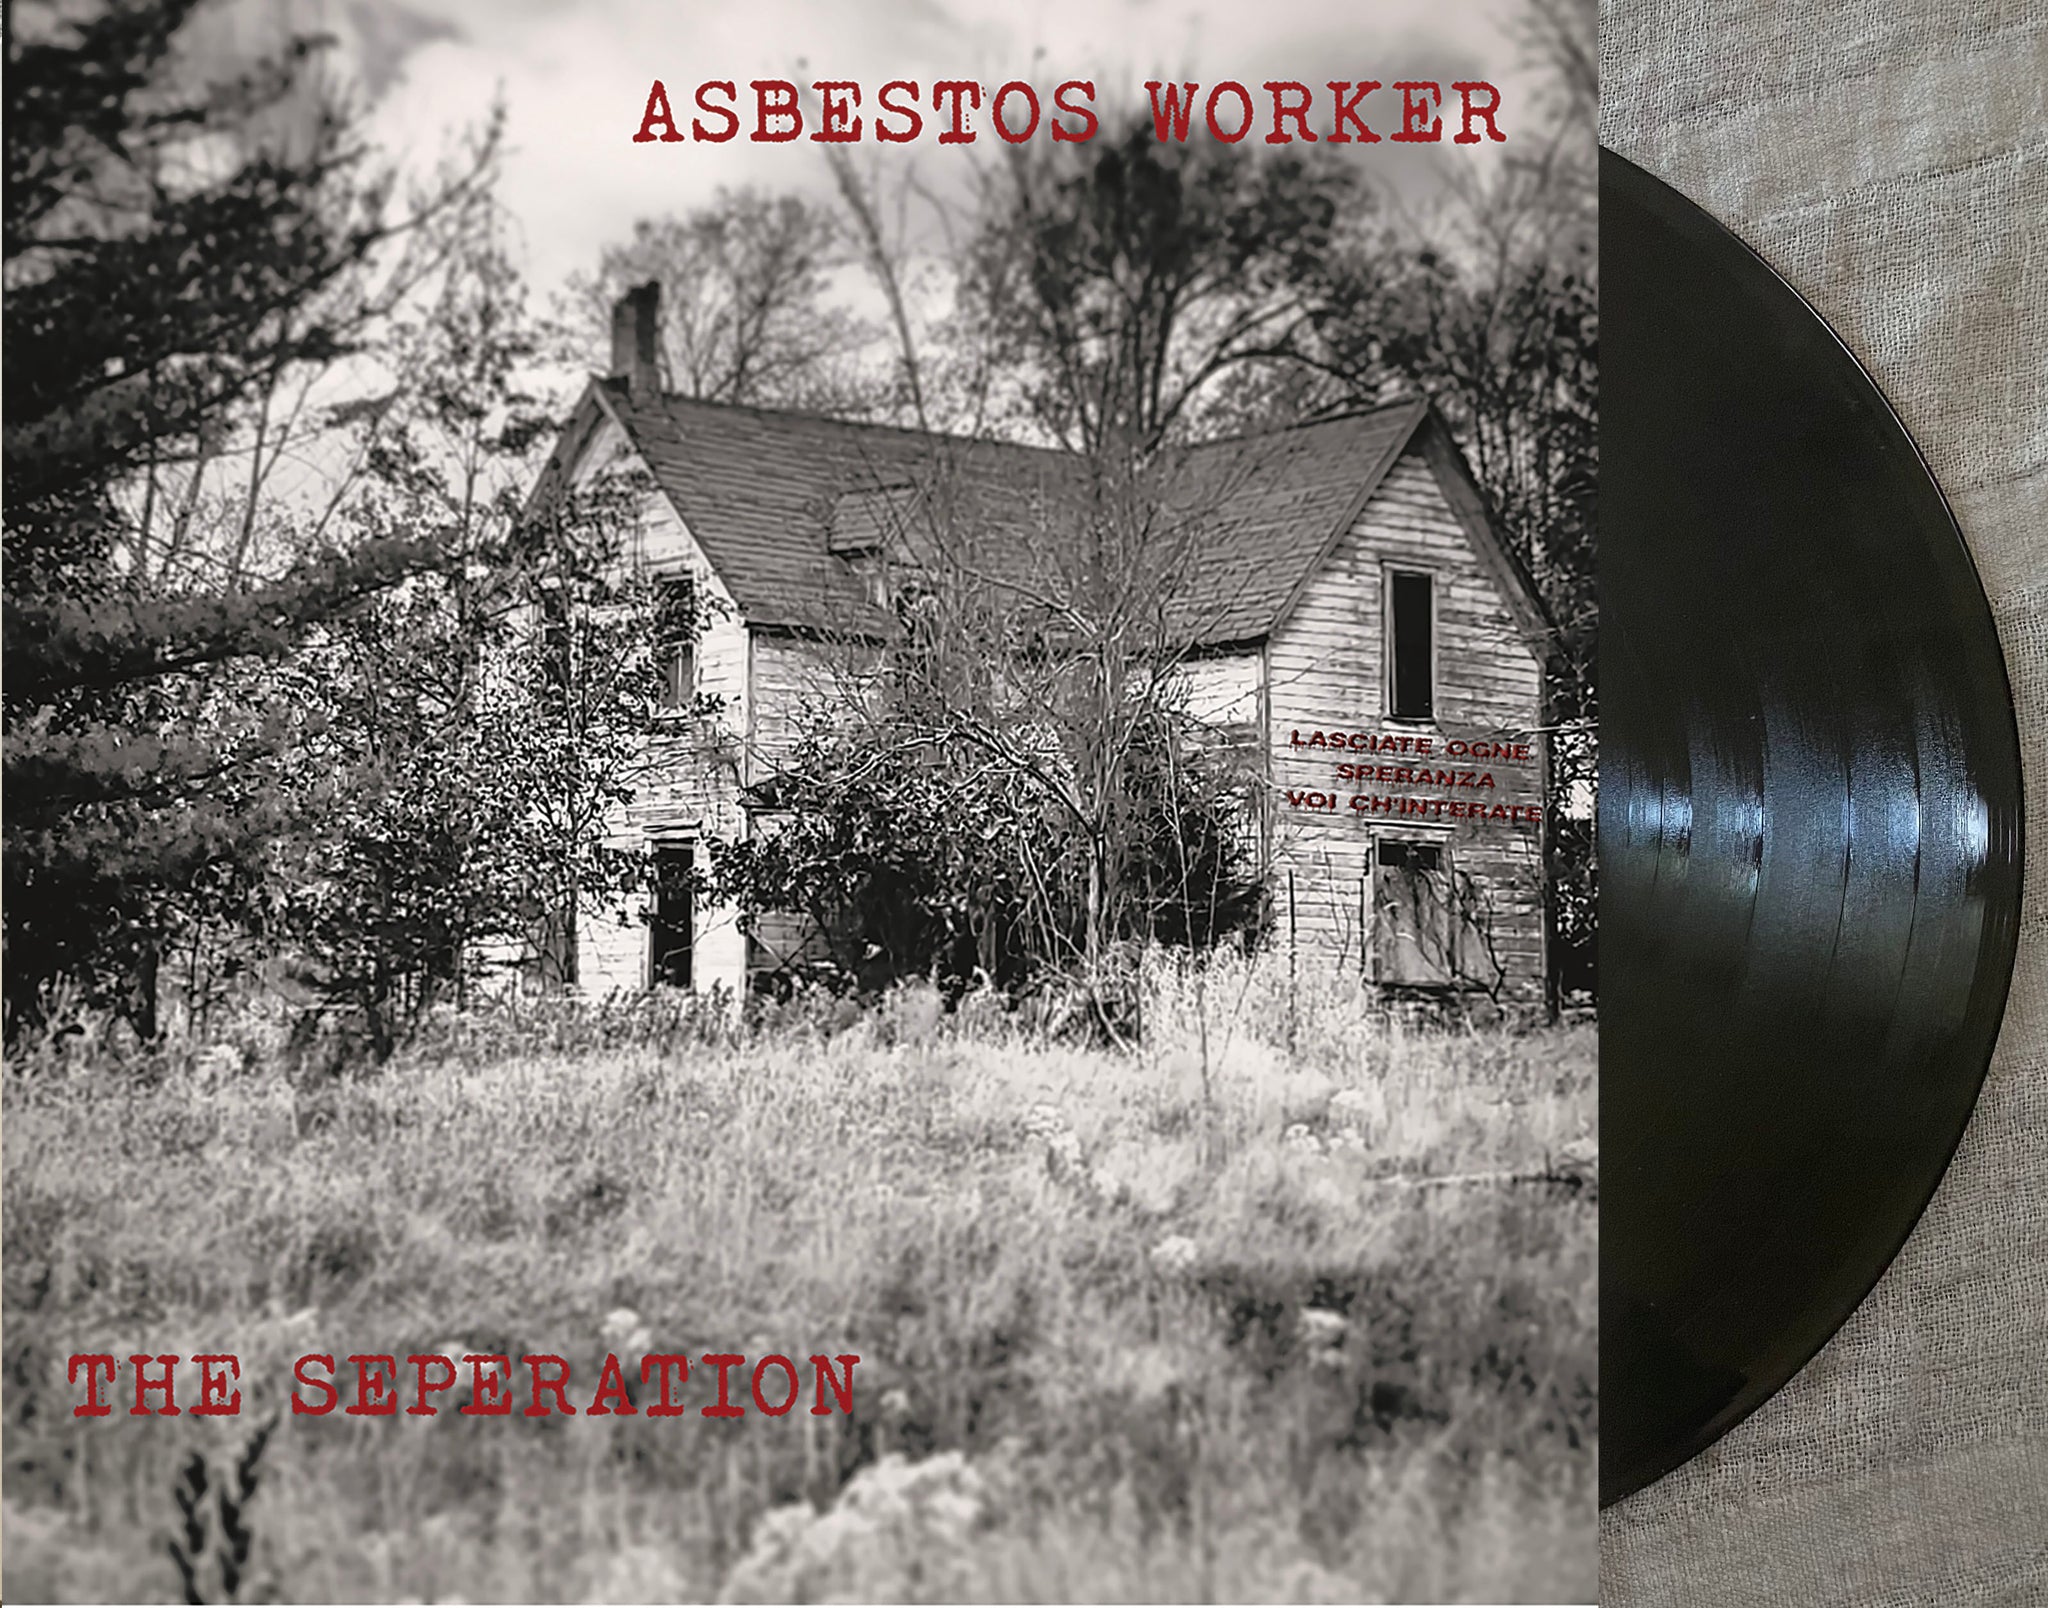 Asbestos Worker "The Seperation" LP